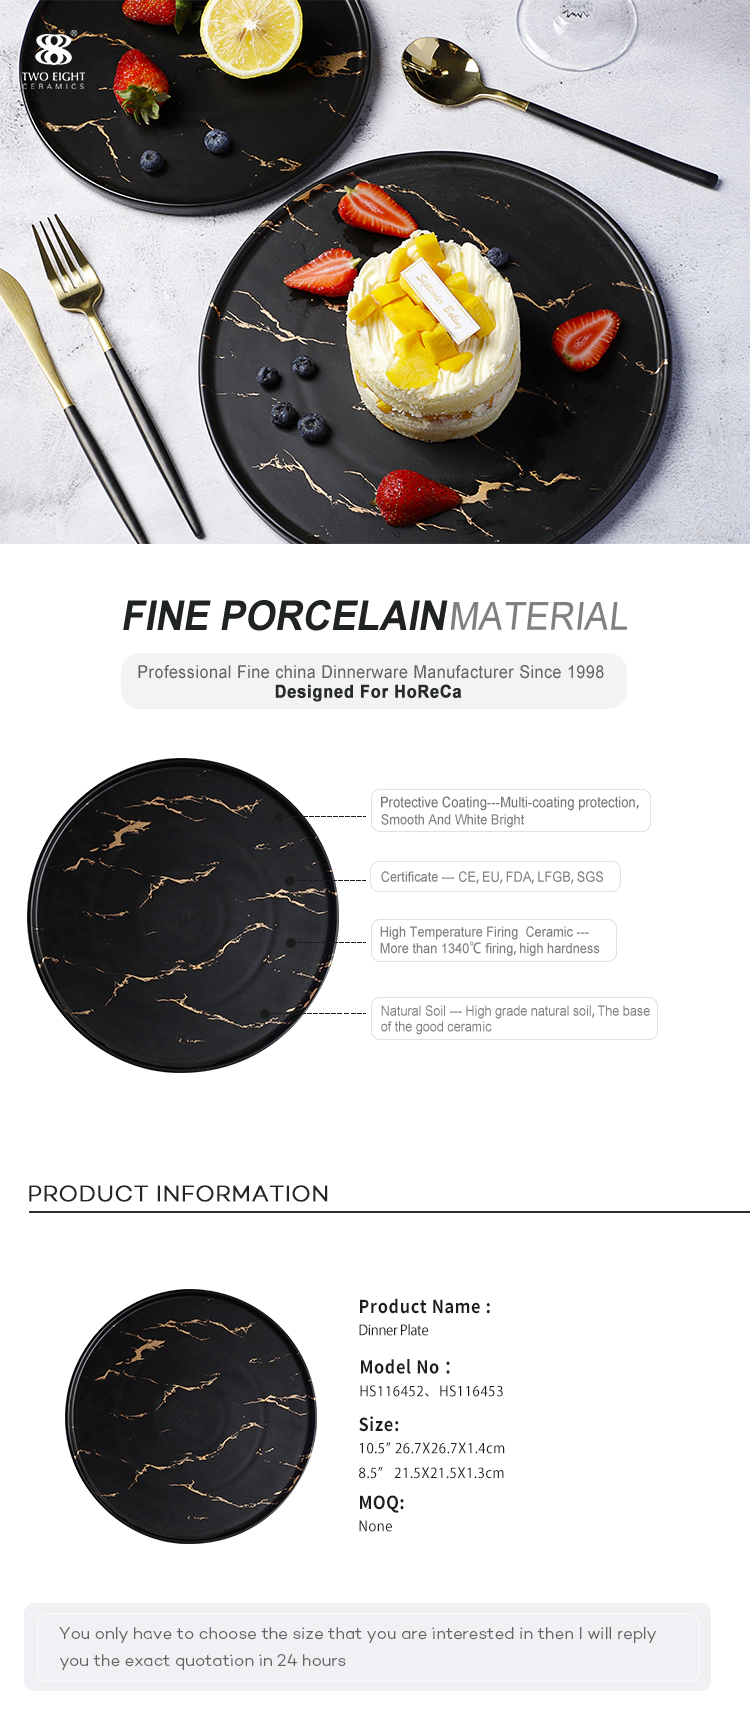 New Design Hotel Use Black &Gold Decal 8.5/10.5 Inch Marble Round Plate, New Design Hotel Use Black &Gold Decal Marble Set&